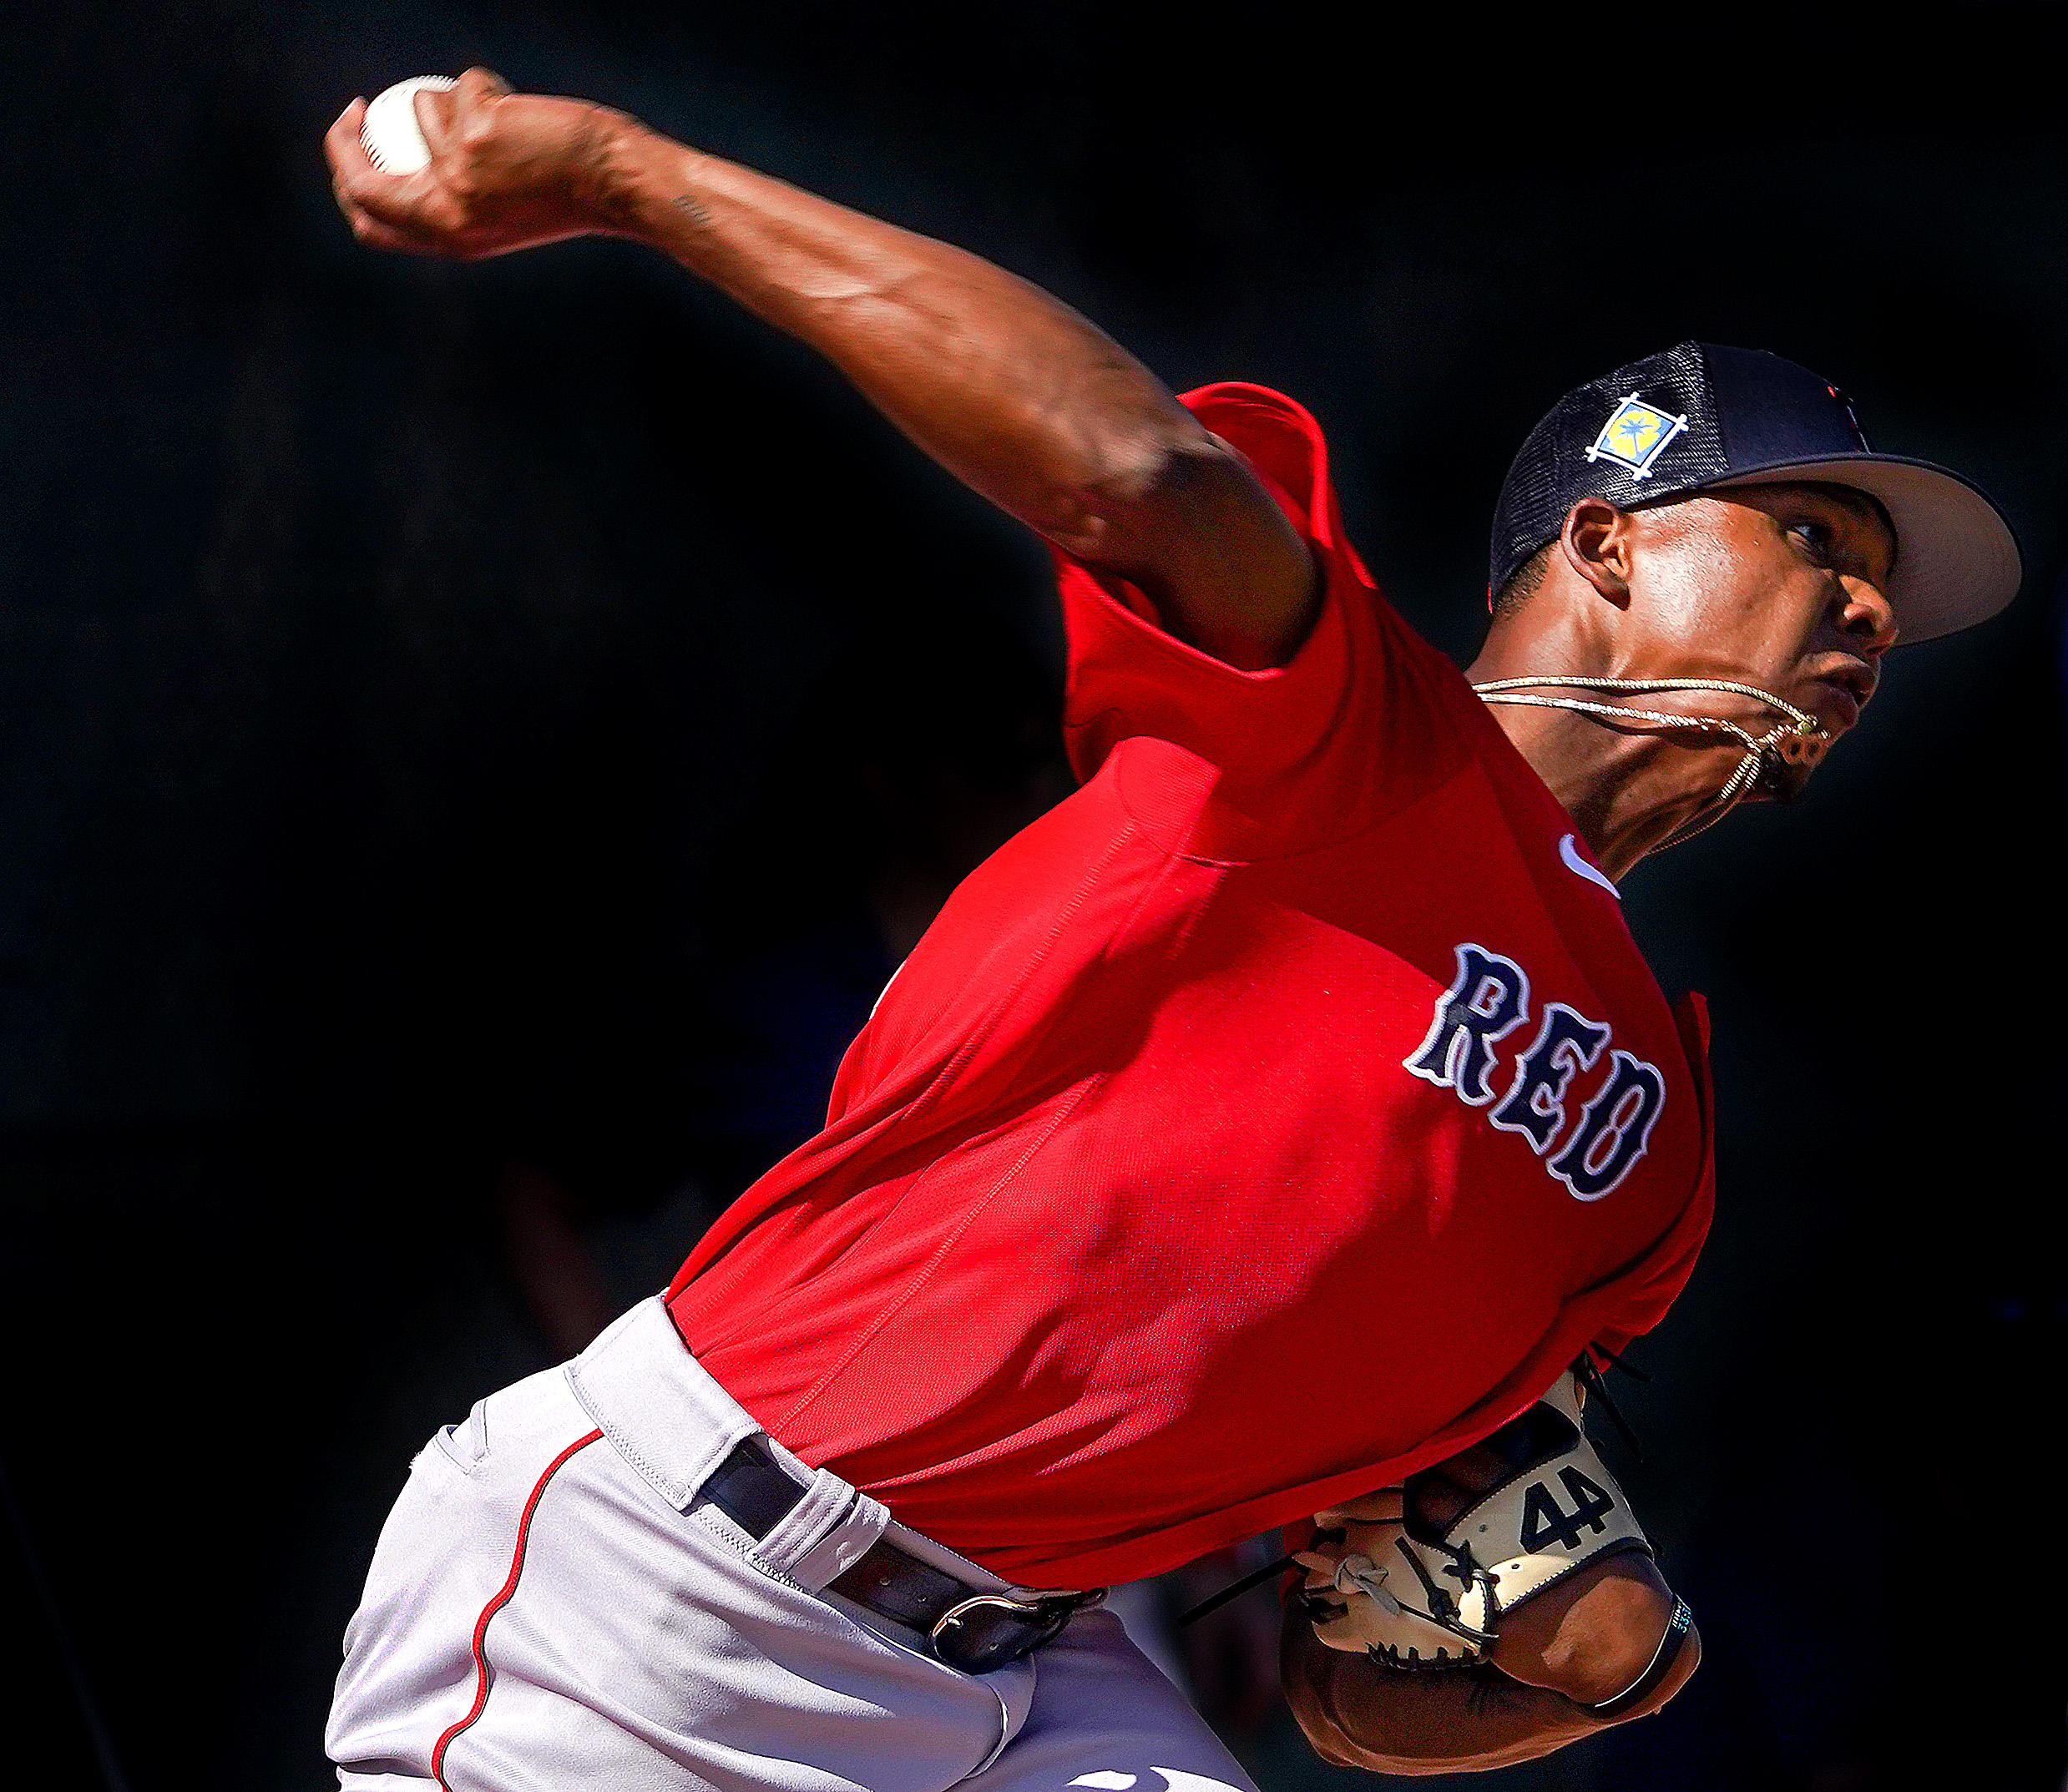 Why was Brayan Bello demoted? The Red Sox felt they could help